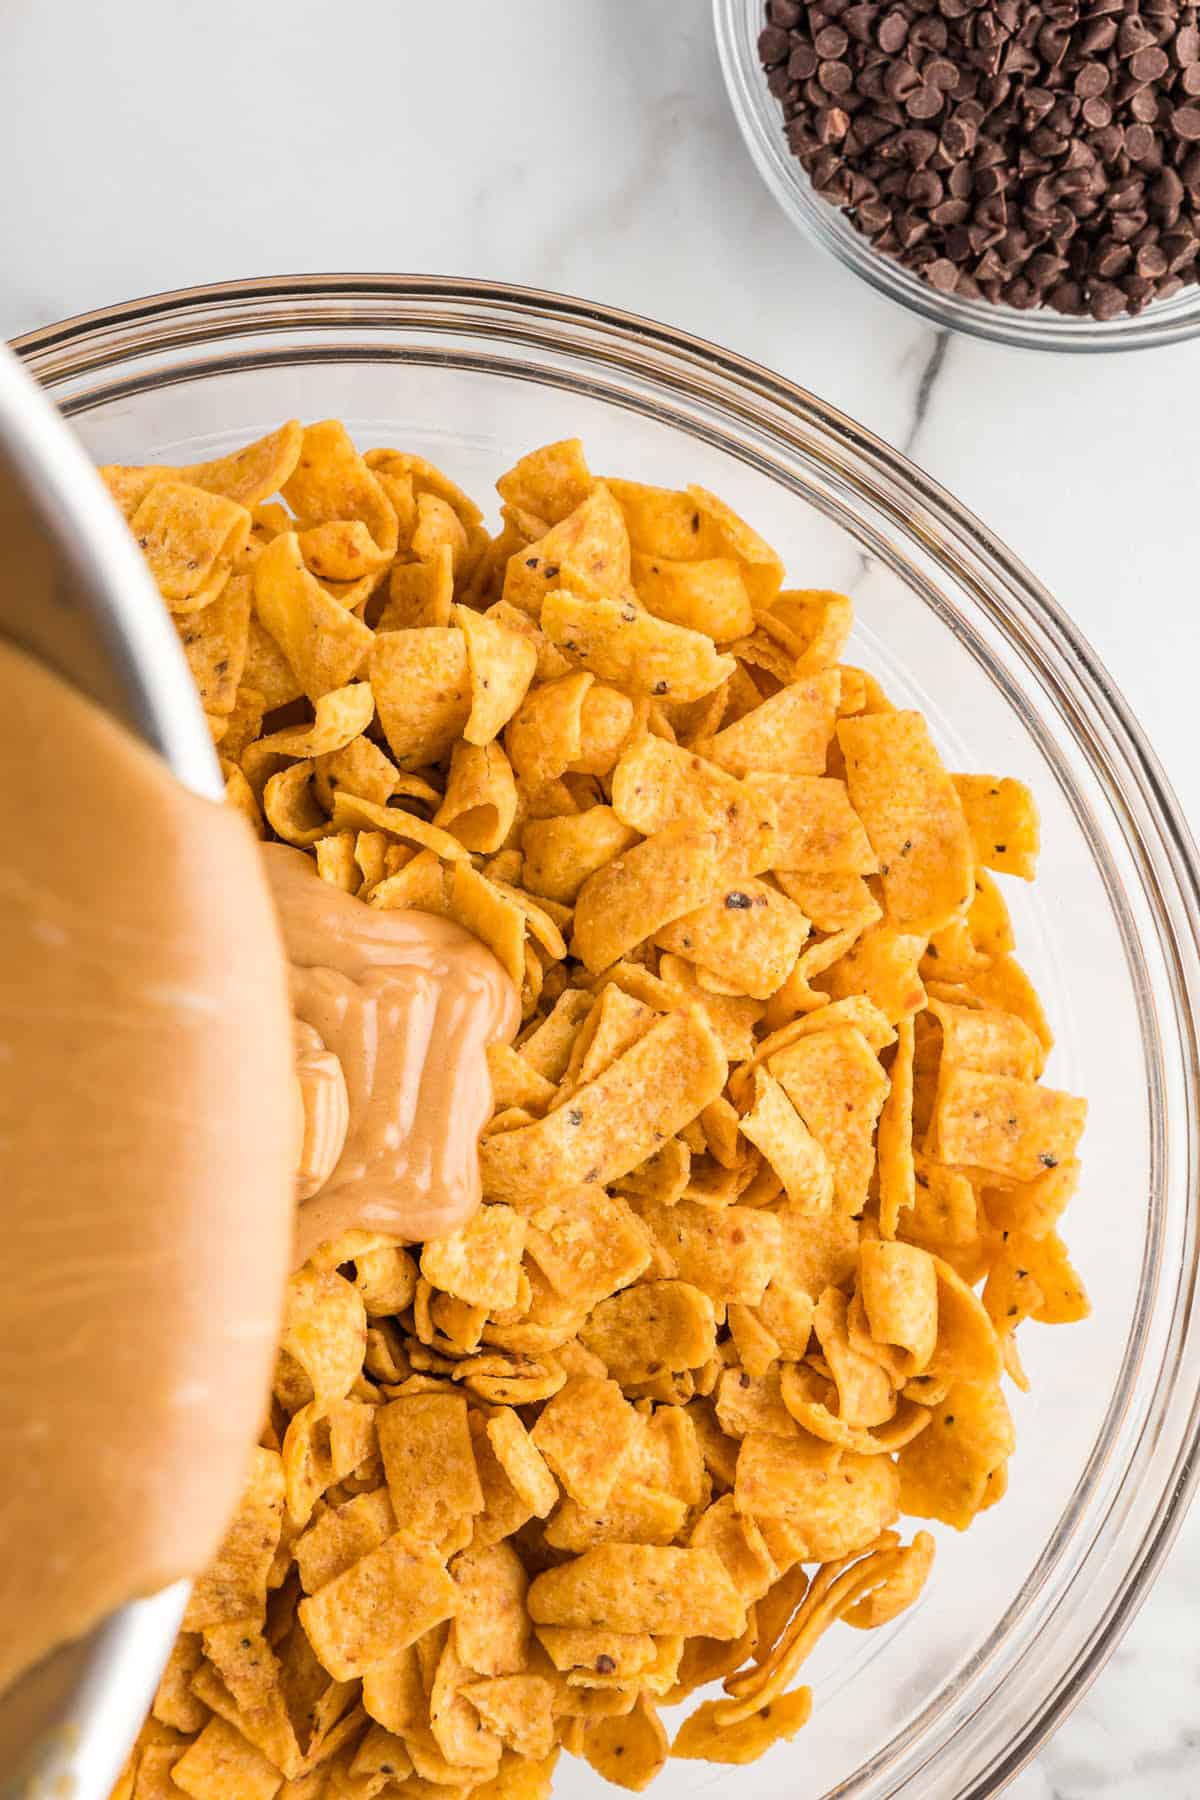 Pouring peanut butter sauce over Fritos in bowl